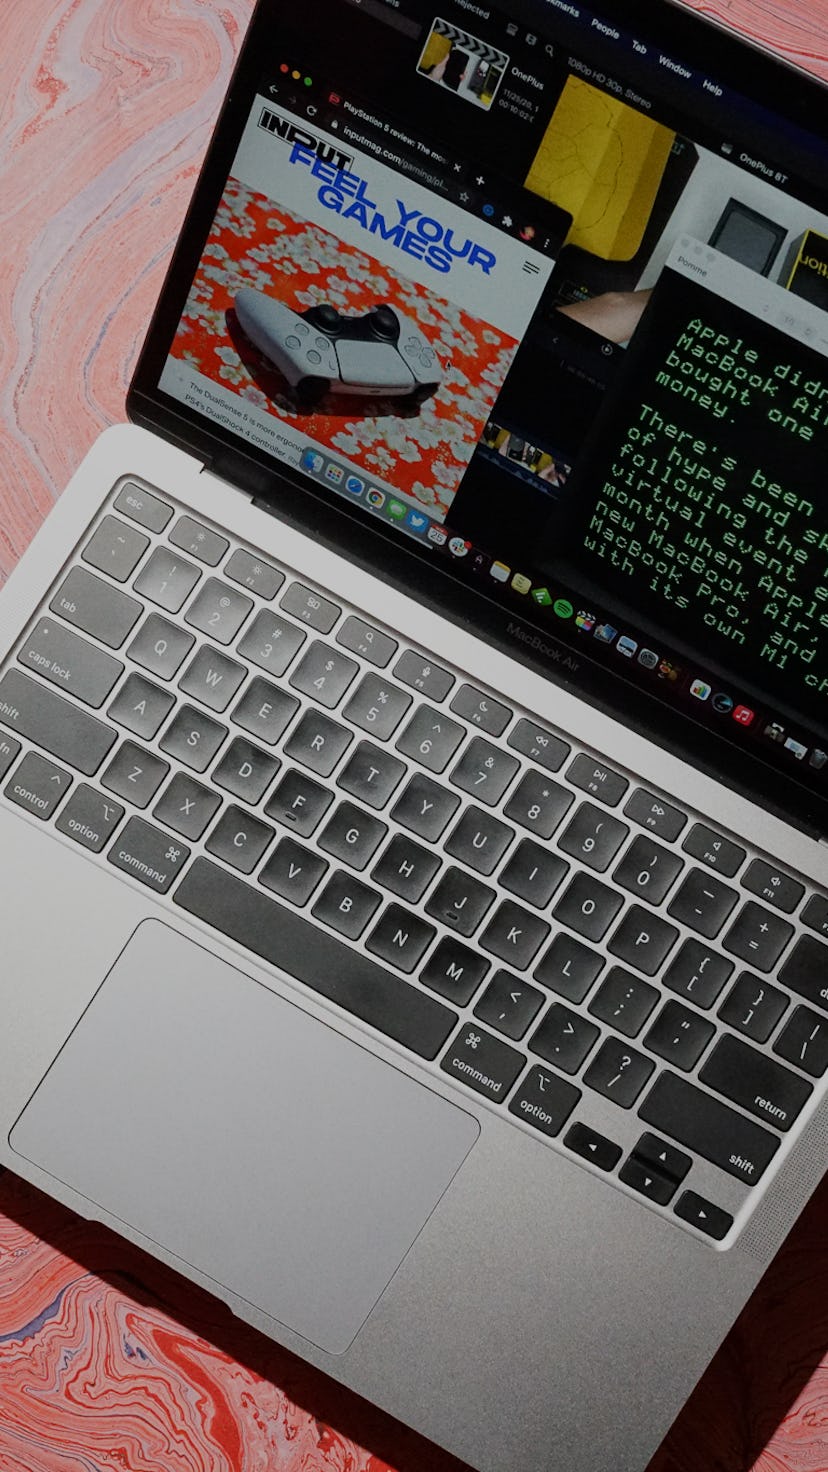 A MacBook Air with the new M1 processor